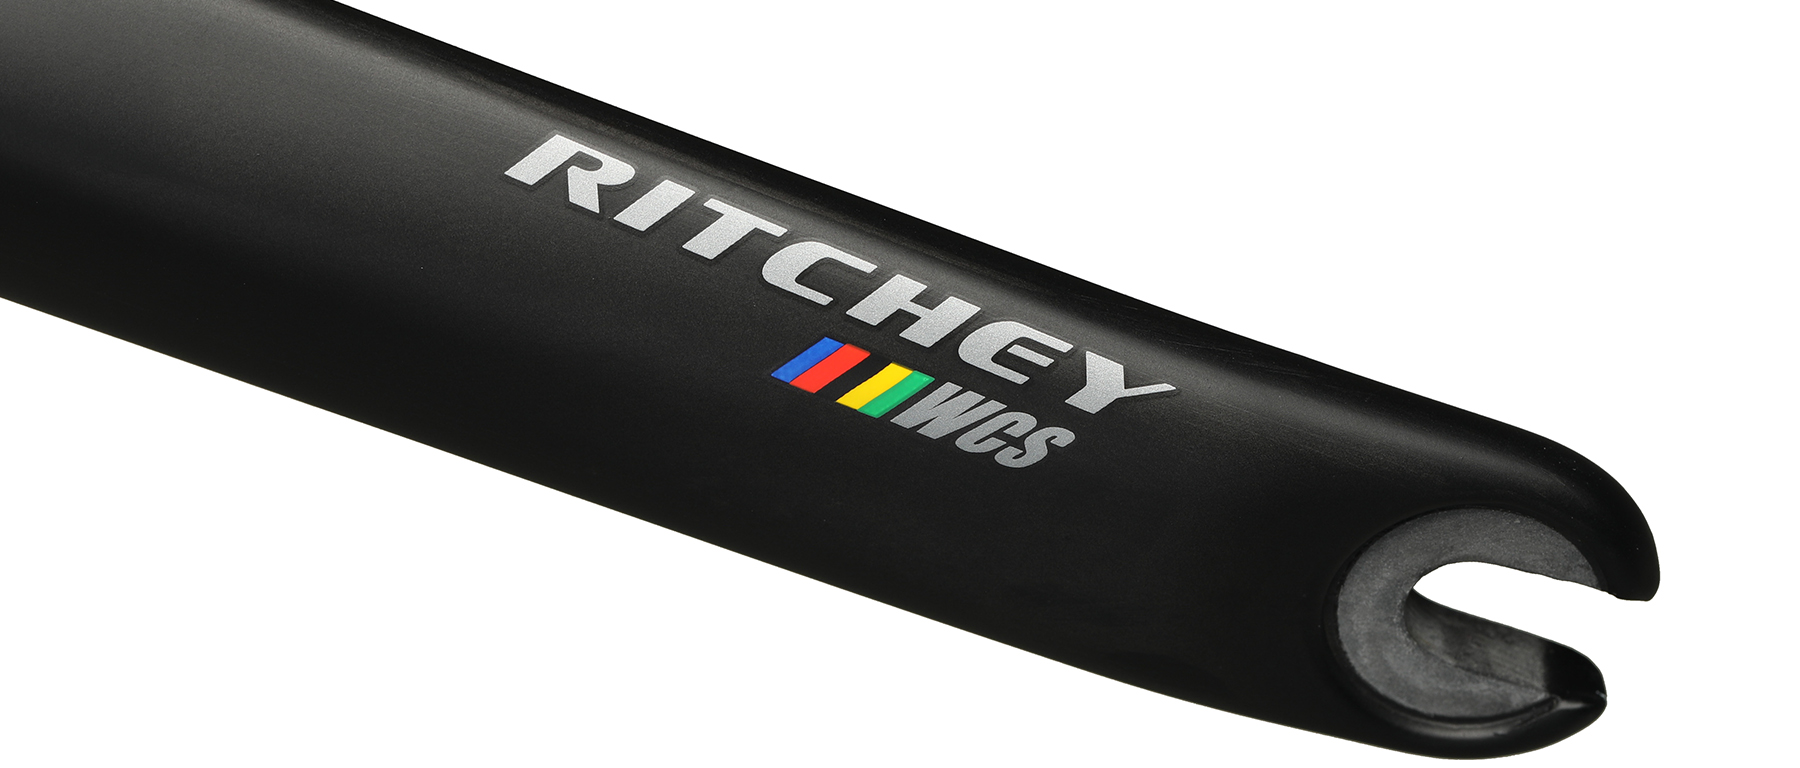 Ritchey WCS Carbon Road Fork